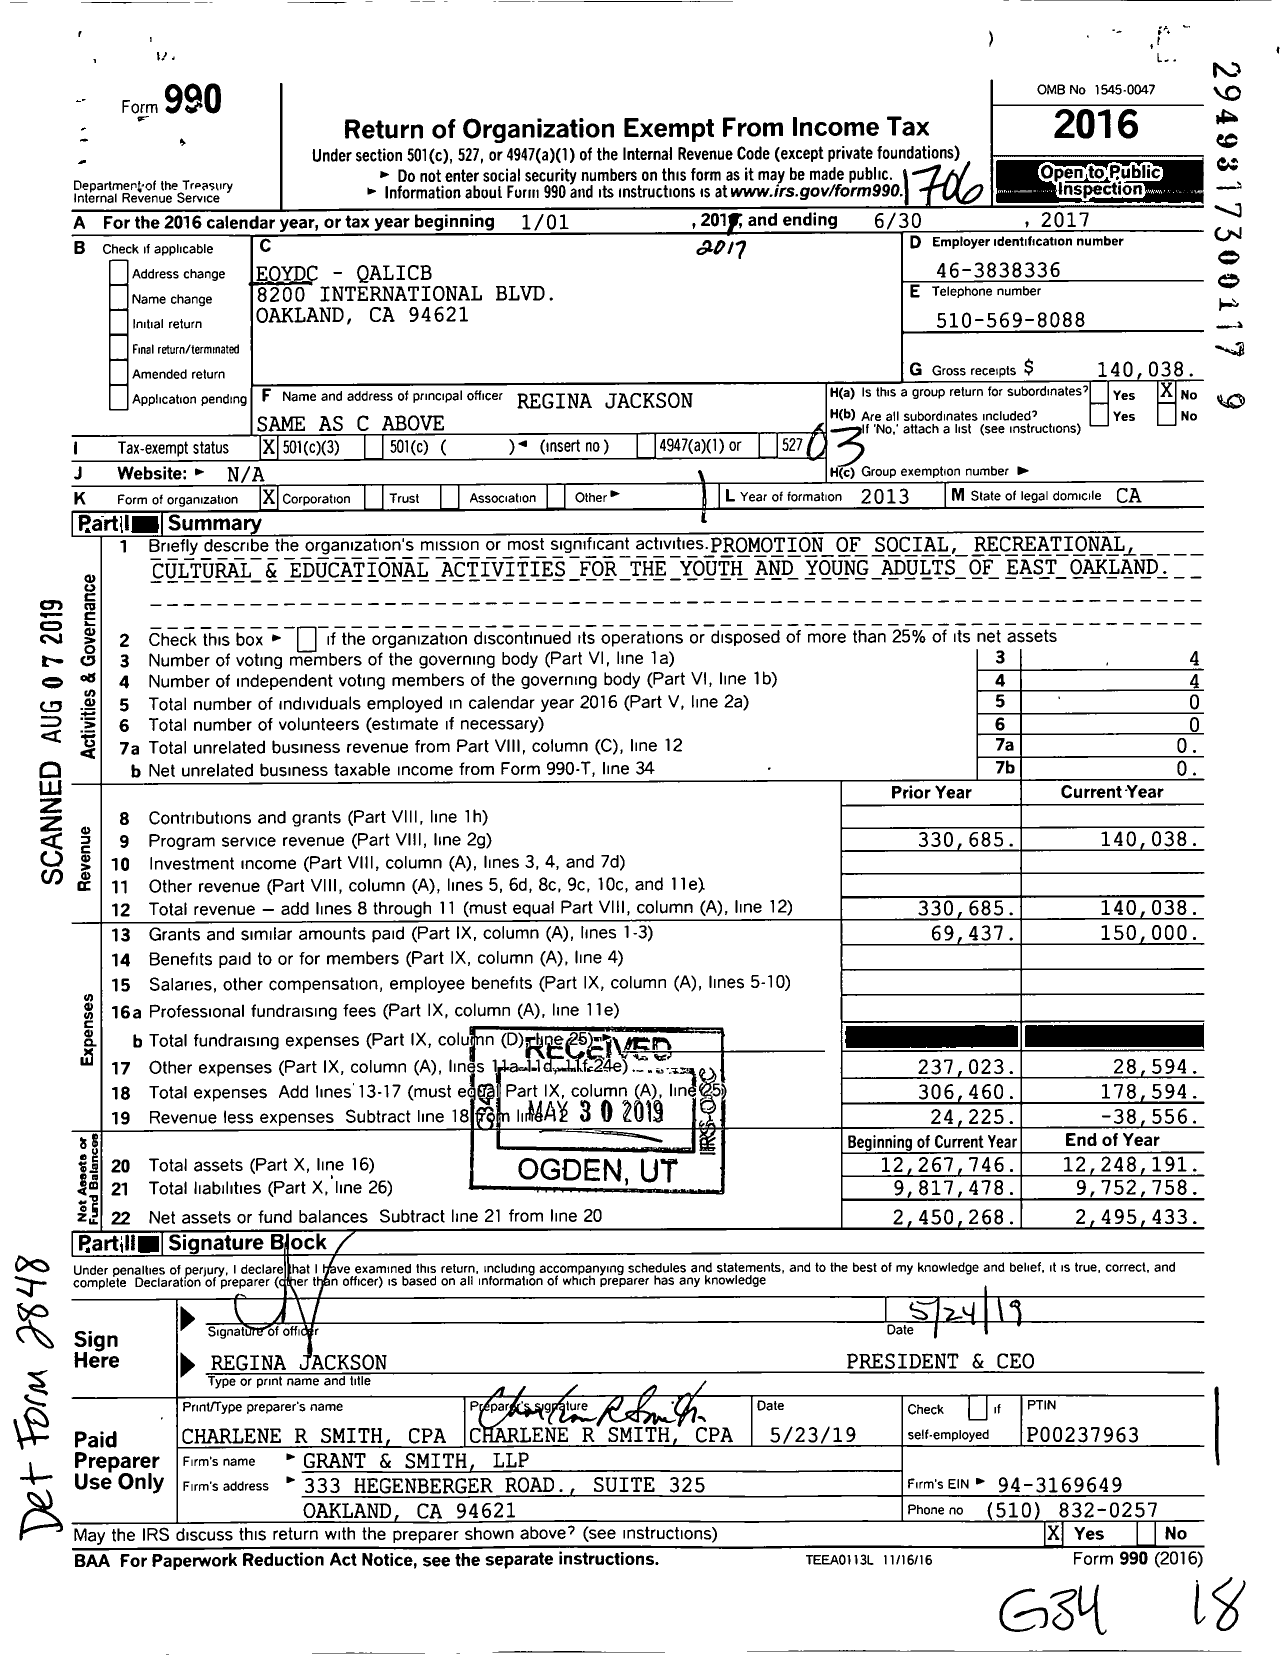 Image of first page of 2016 Form 990 for Eoydc - Qalicb